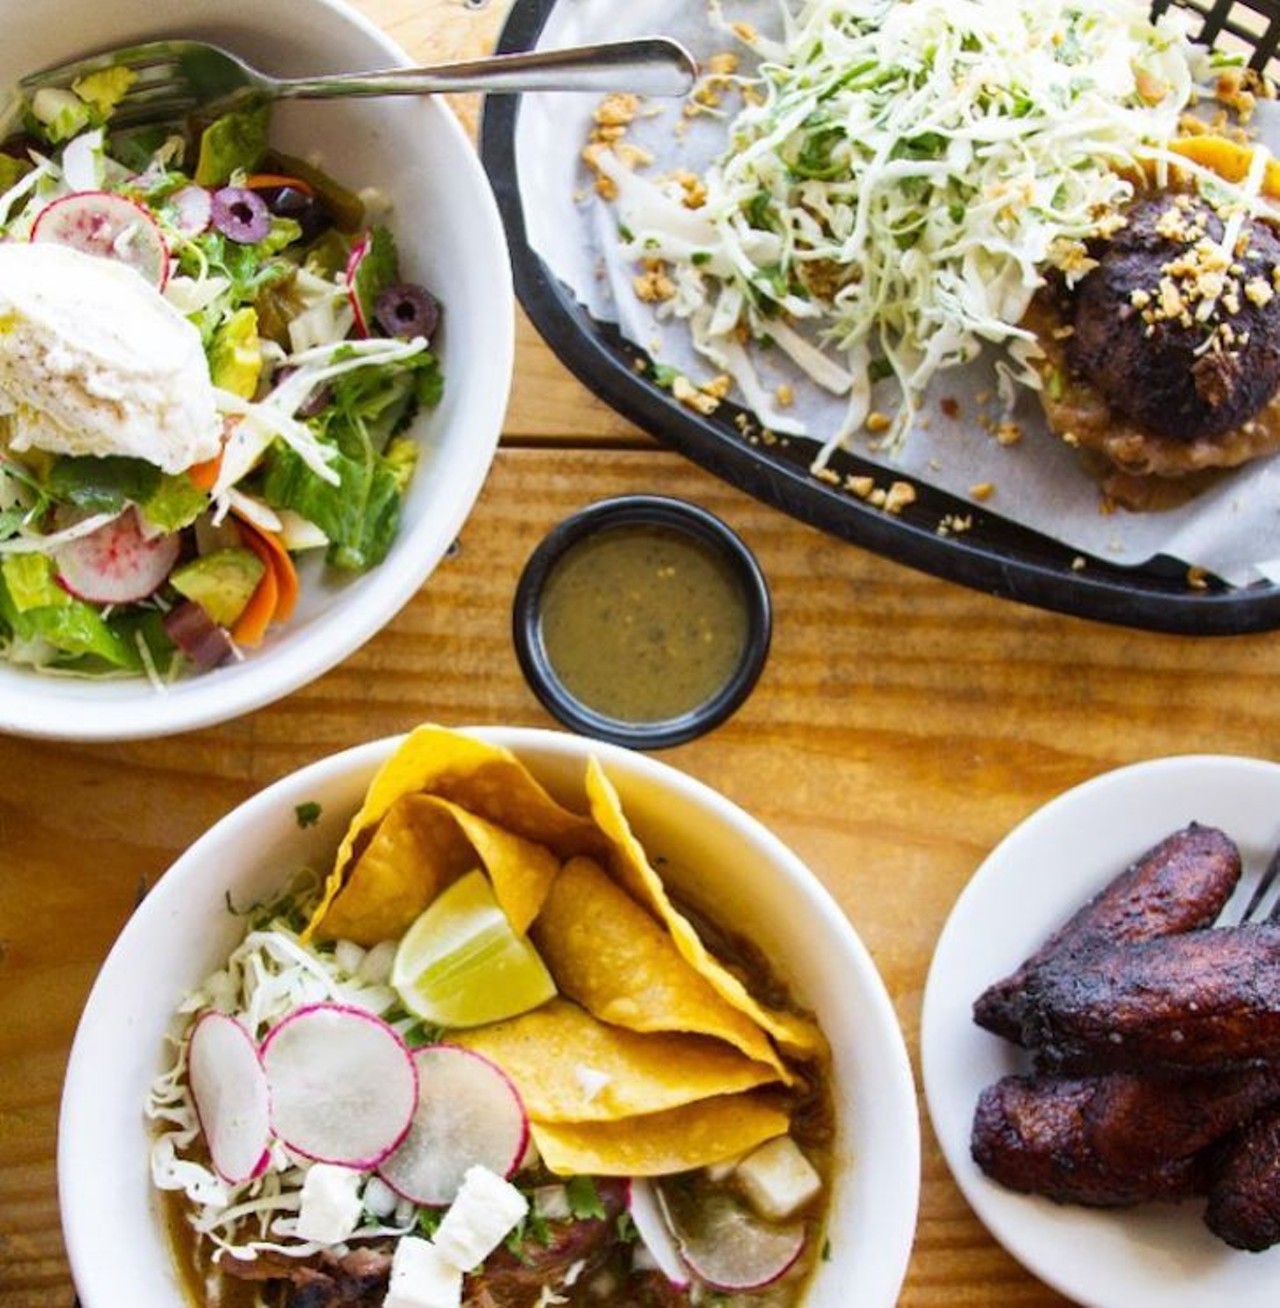 Black Rooster Taqueria
You&#146;ve heard of farm to plate, but how about farm to taco? For sustainably sourced, authentic Latin food-fare, look to the family-owned Black Rooster Taqueria. Open for lunch and dinner shifts; closed between 2 and 5 p.m. during weekdays and 3 and 5 p.m. during the weekends.
Photo via  blkroostertaco/Instagram